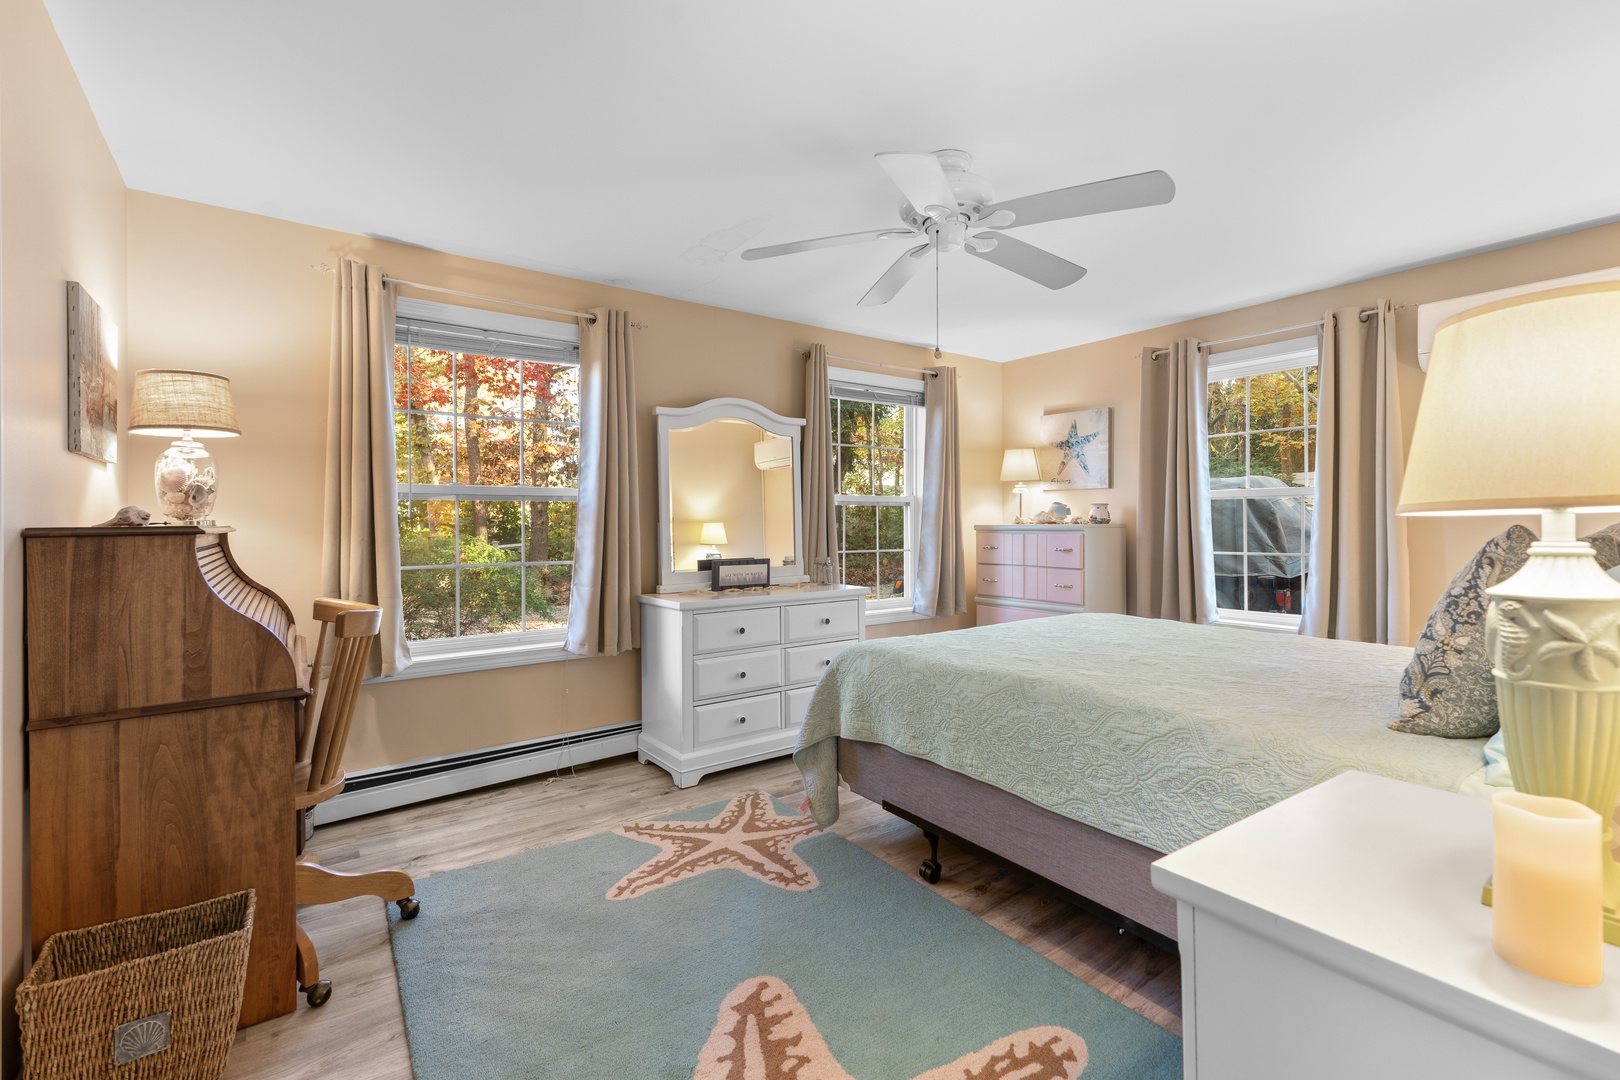 This 2nd floor bedroom offers a queen bed, desk workspace, & ceiling fan